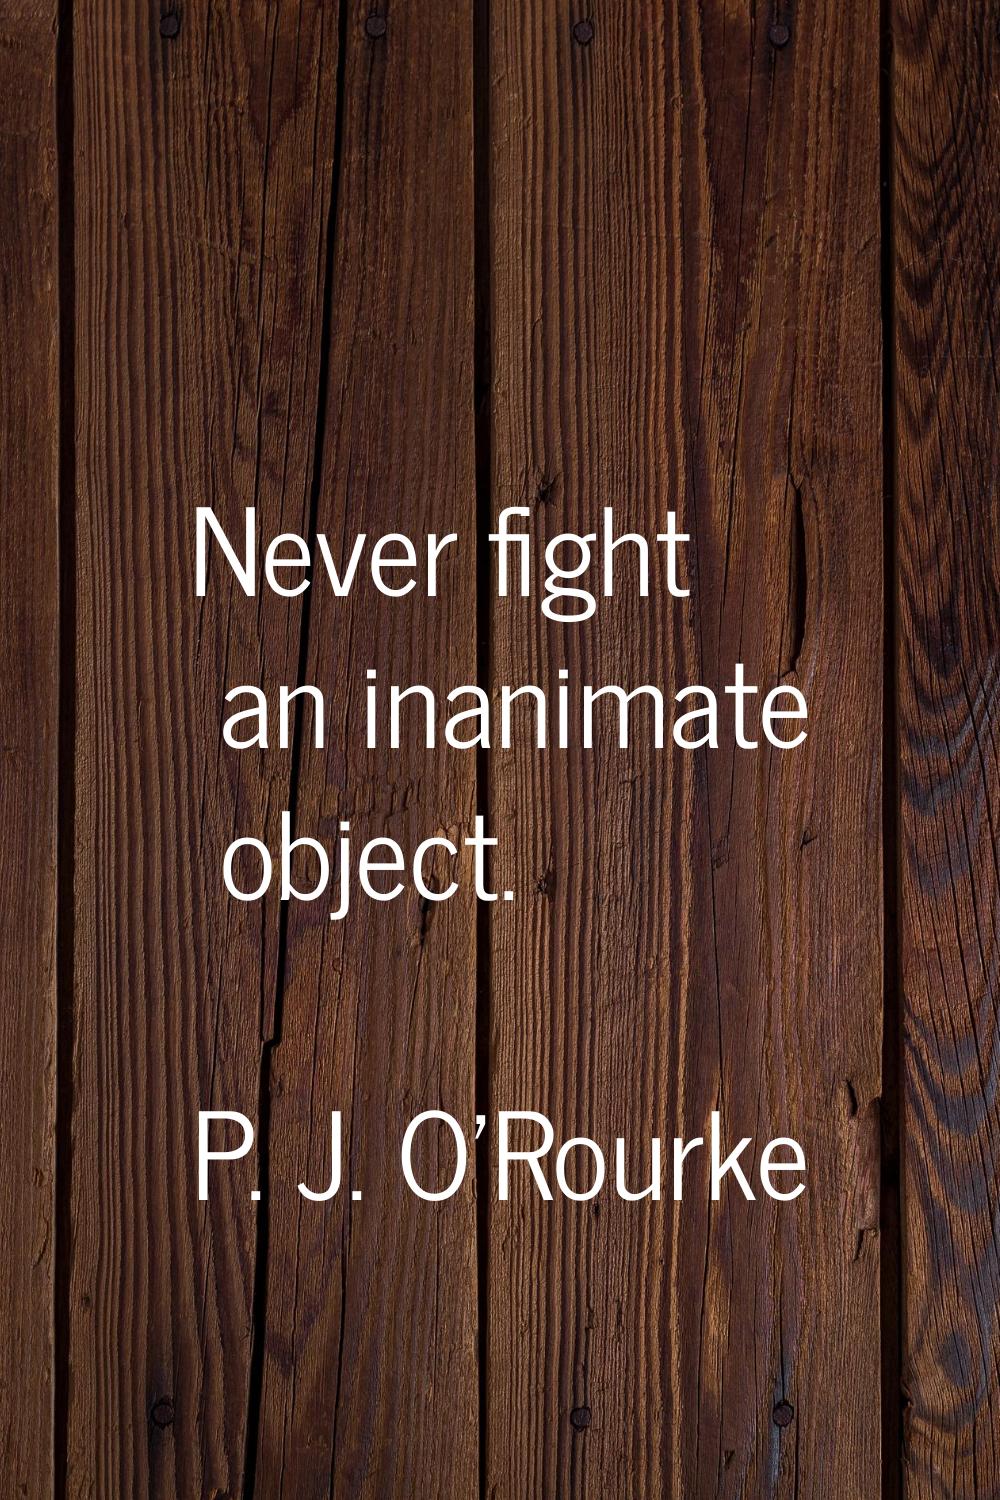 Never fight an inanimate object.